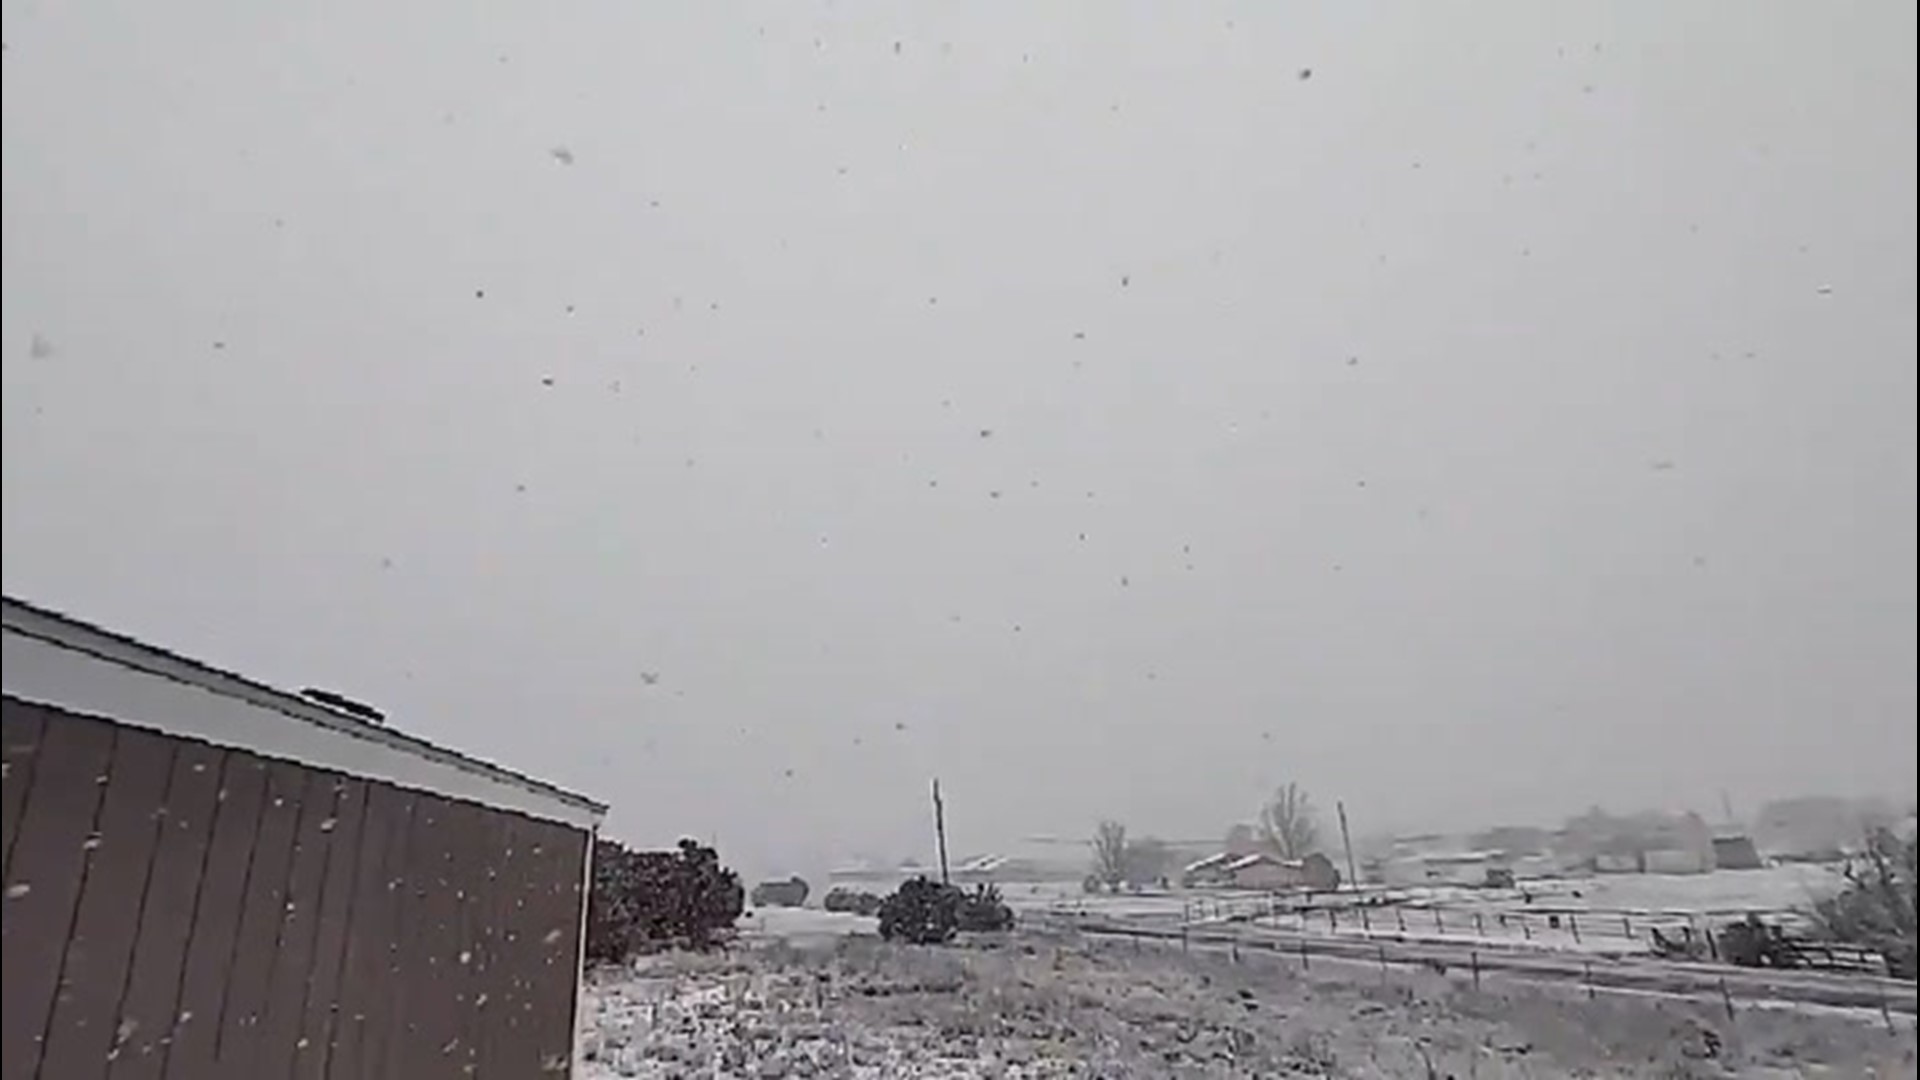 This slow-motion video captured in Edgewood, New Mexico, made the snow look like it's falling down slowly like a snow globe on Feb. 23.